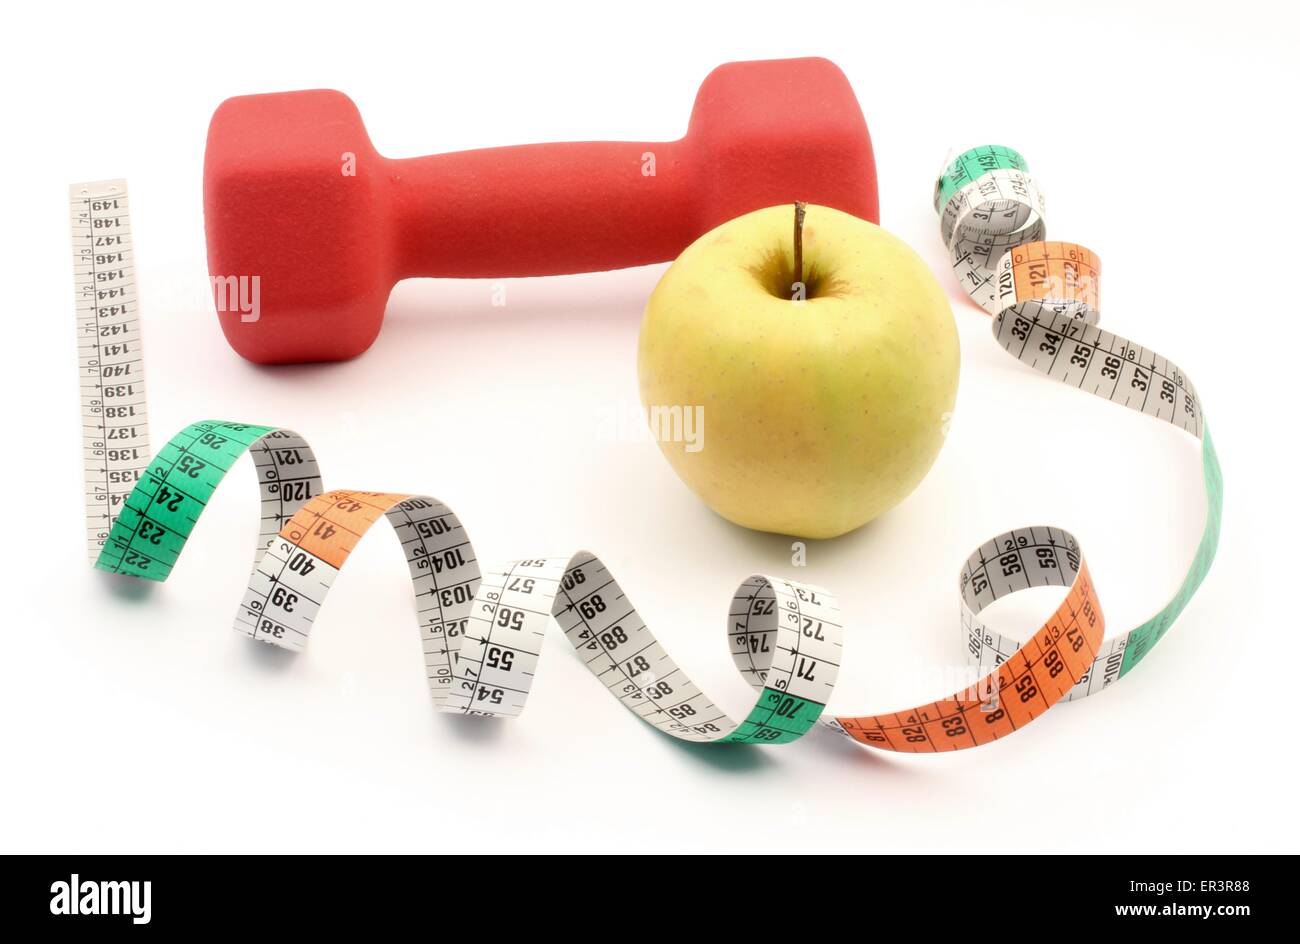 Keep in line with the right tools, gymnastics, food, control. Stock Photo